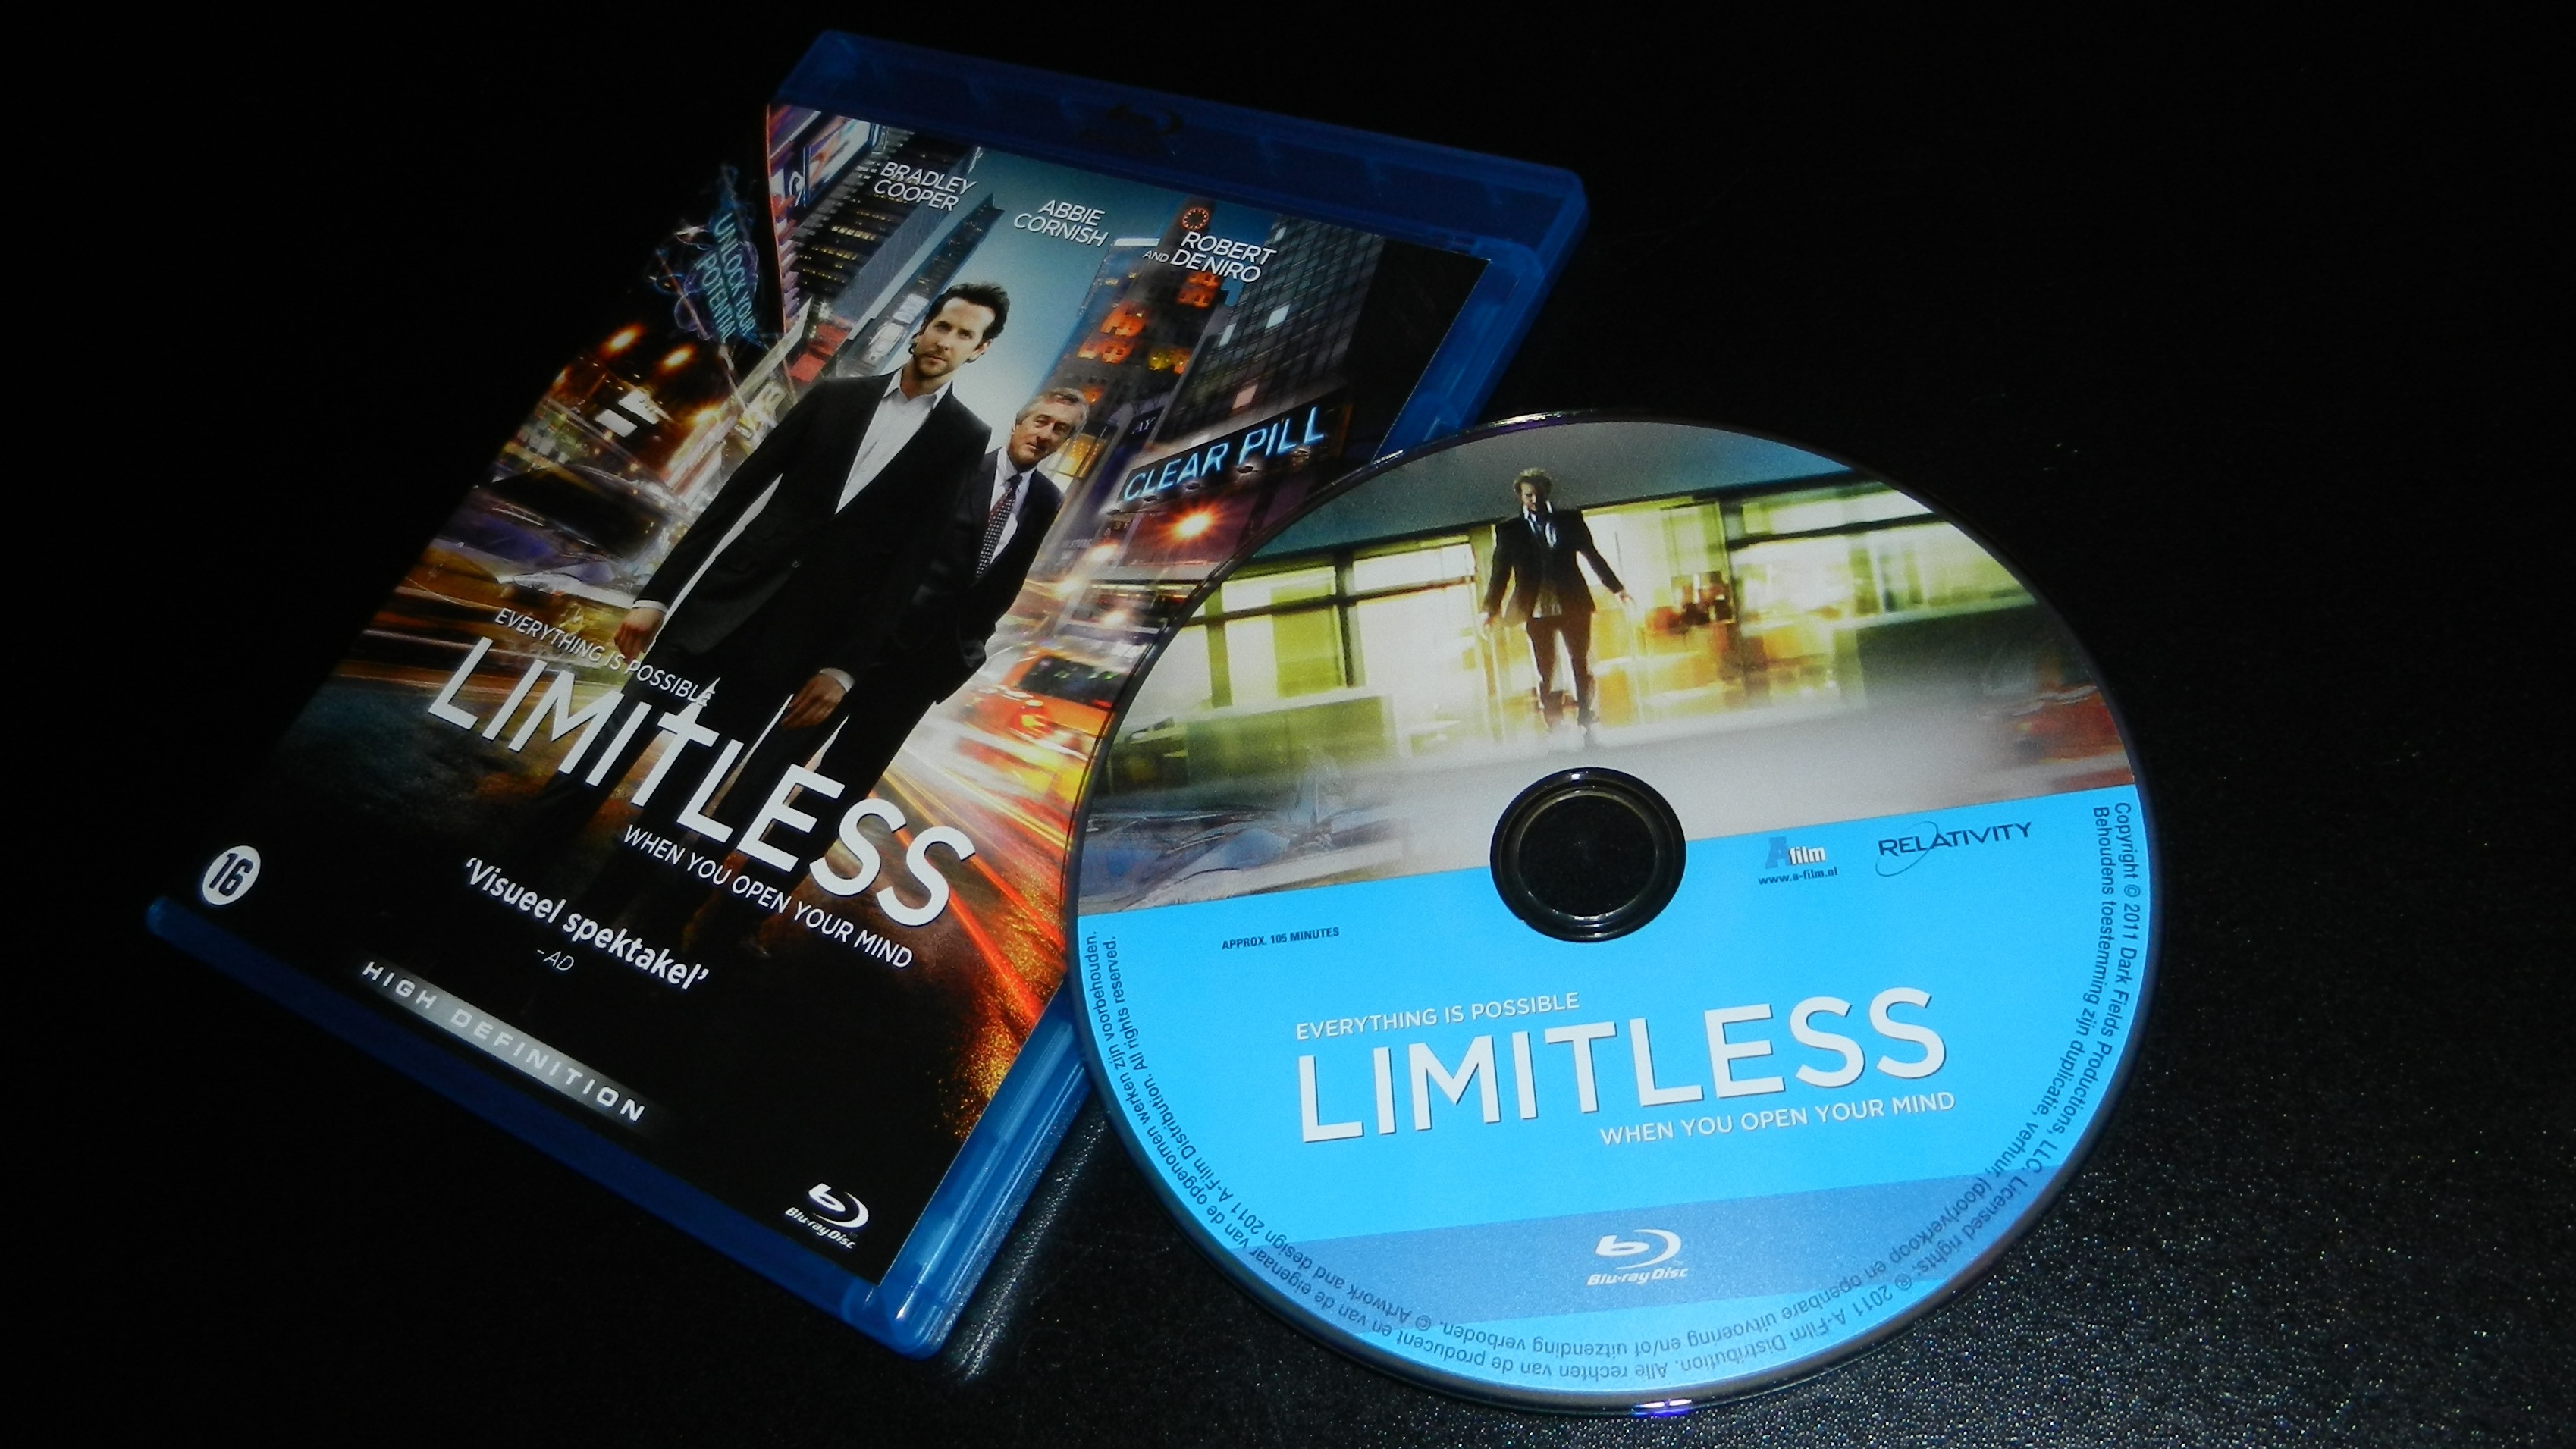 Blu-Ray Review: Limitless